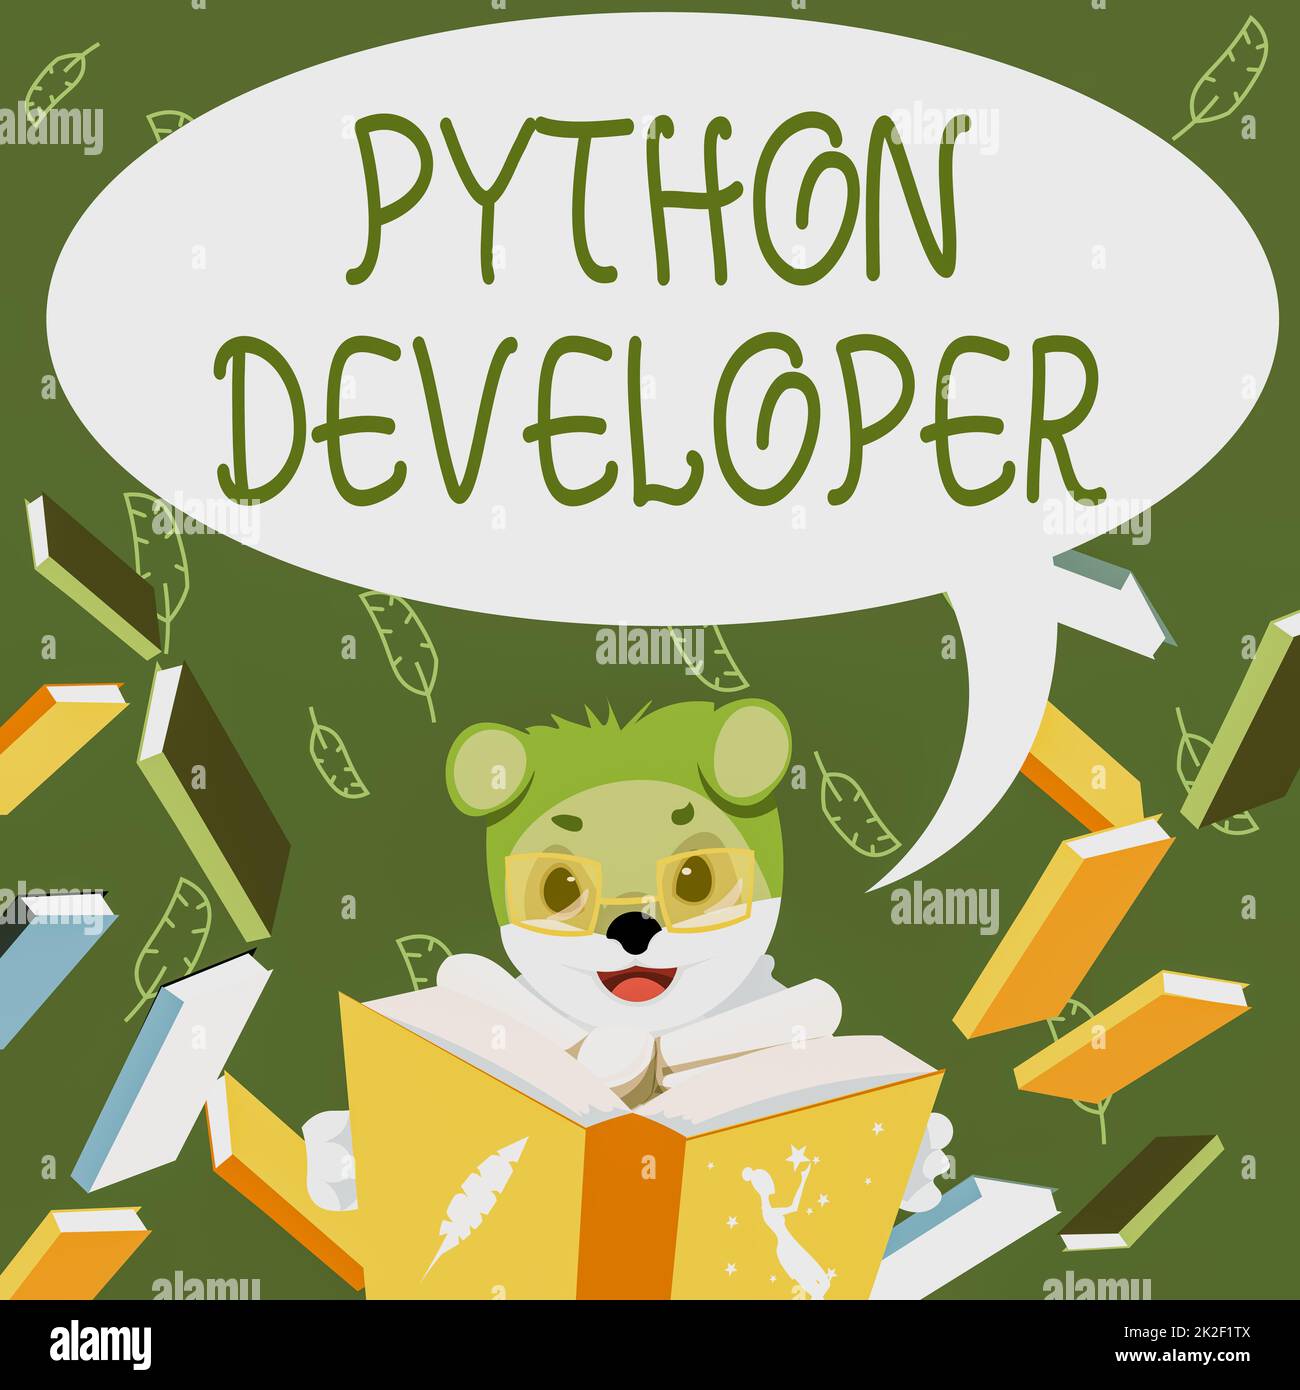 Text sign showing Python Developer. Internet Concept responsible for writing serverside web application logic Fox With Glasses Sitting In Library Reading A Book Studying. Stock Photo